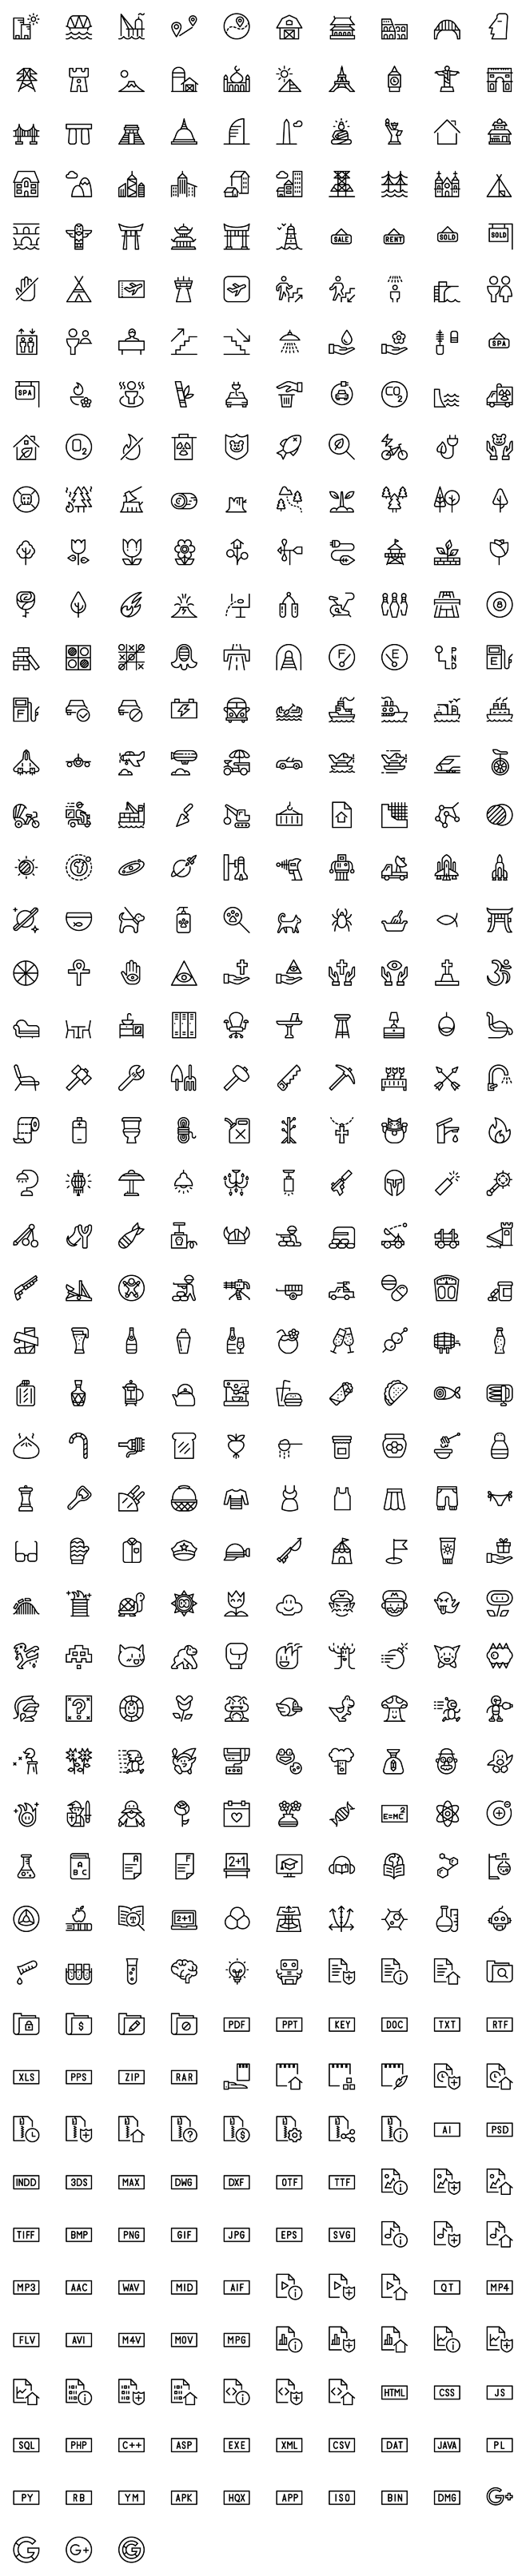 New icons selection ...